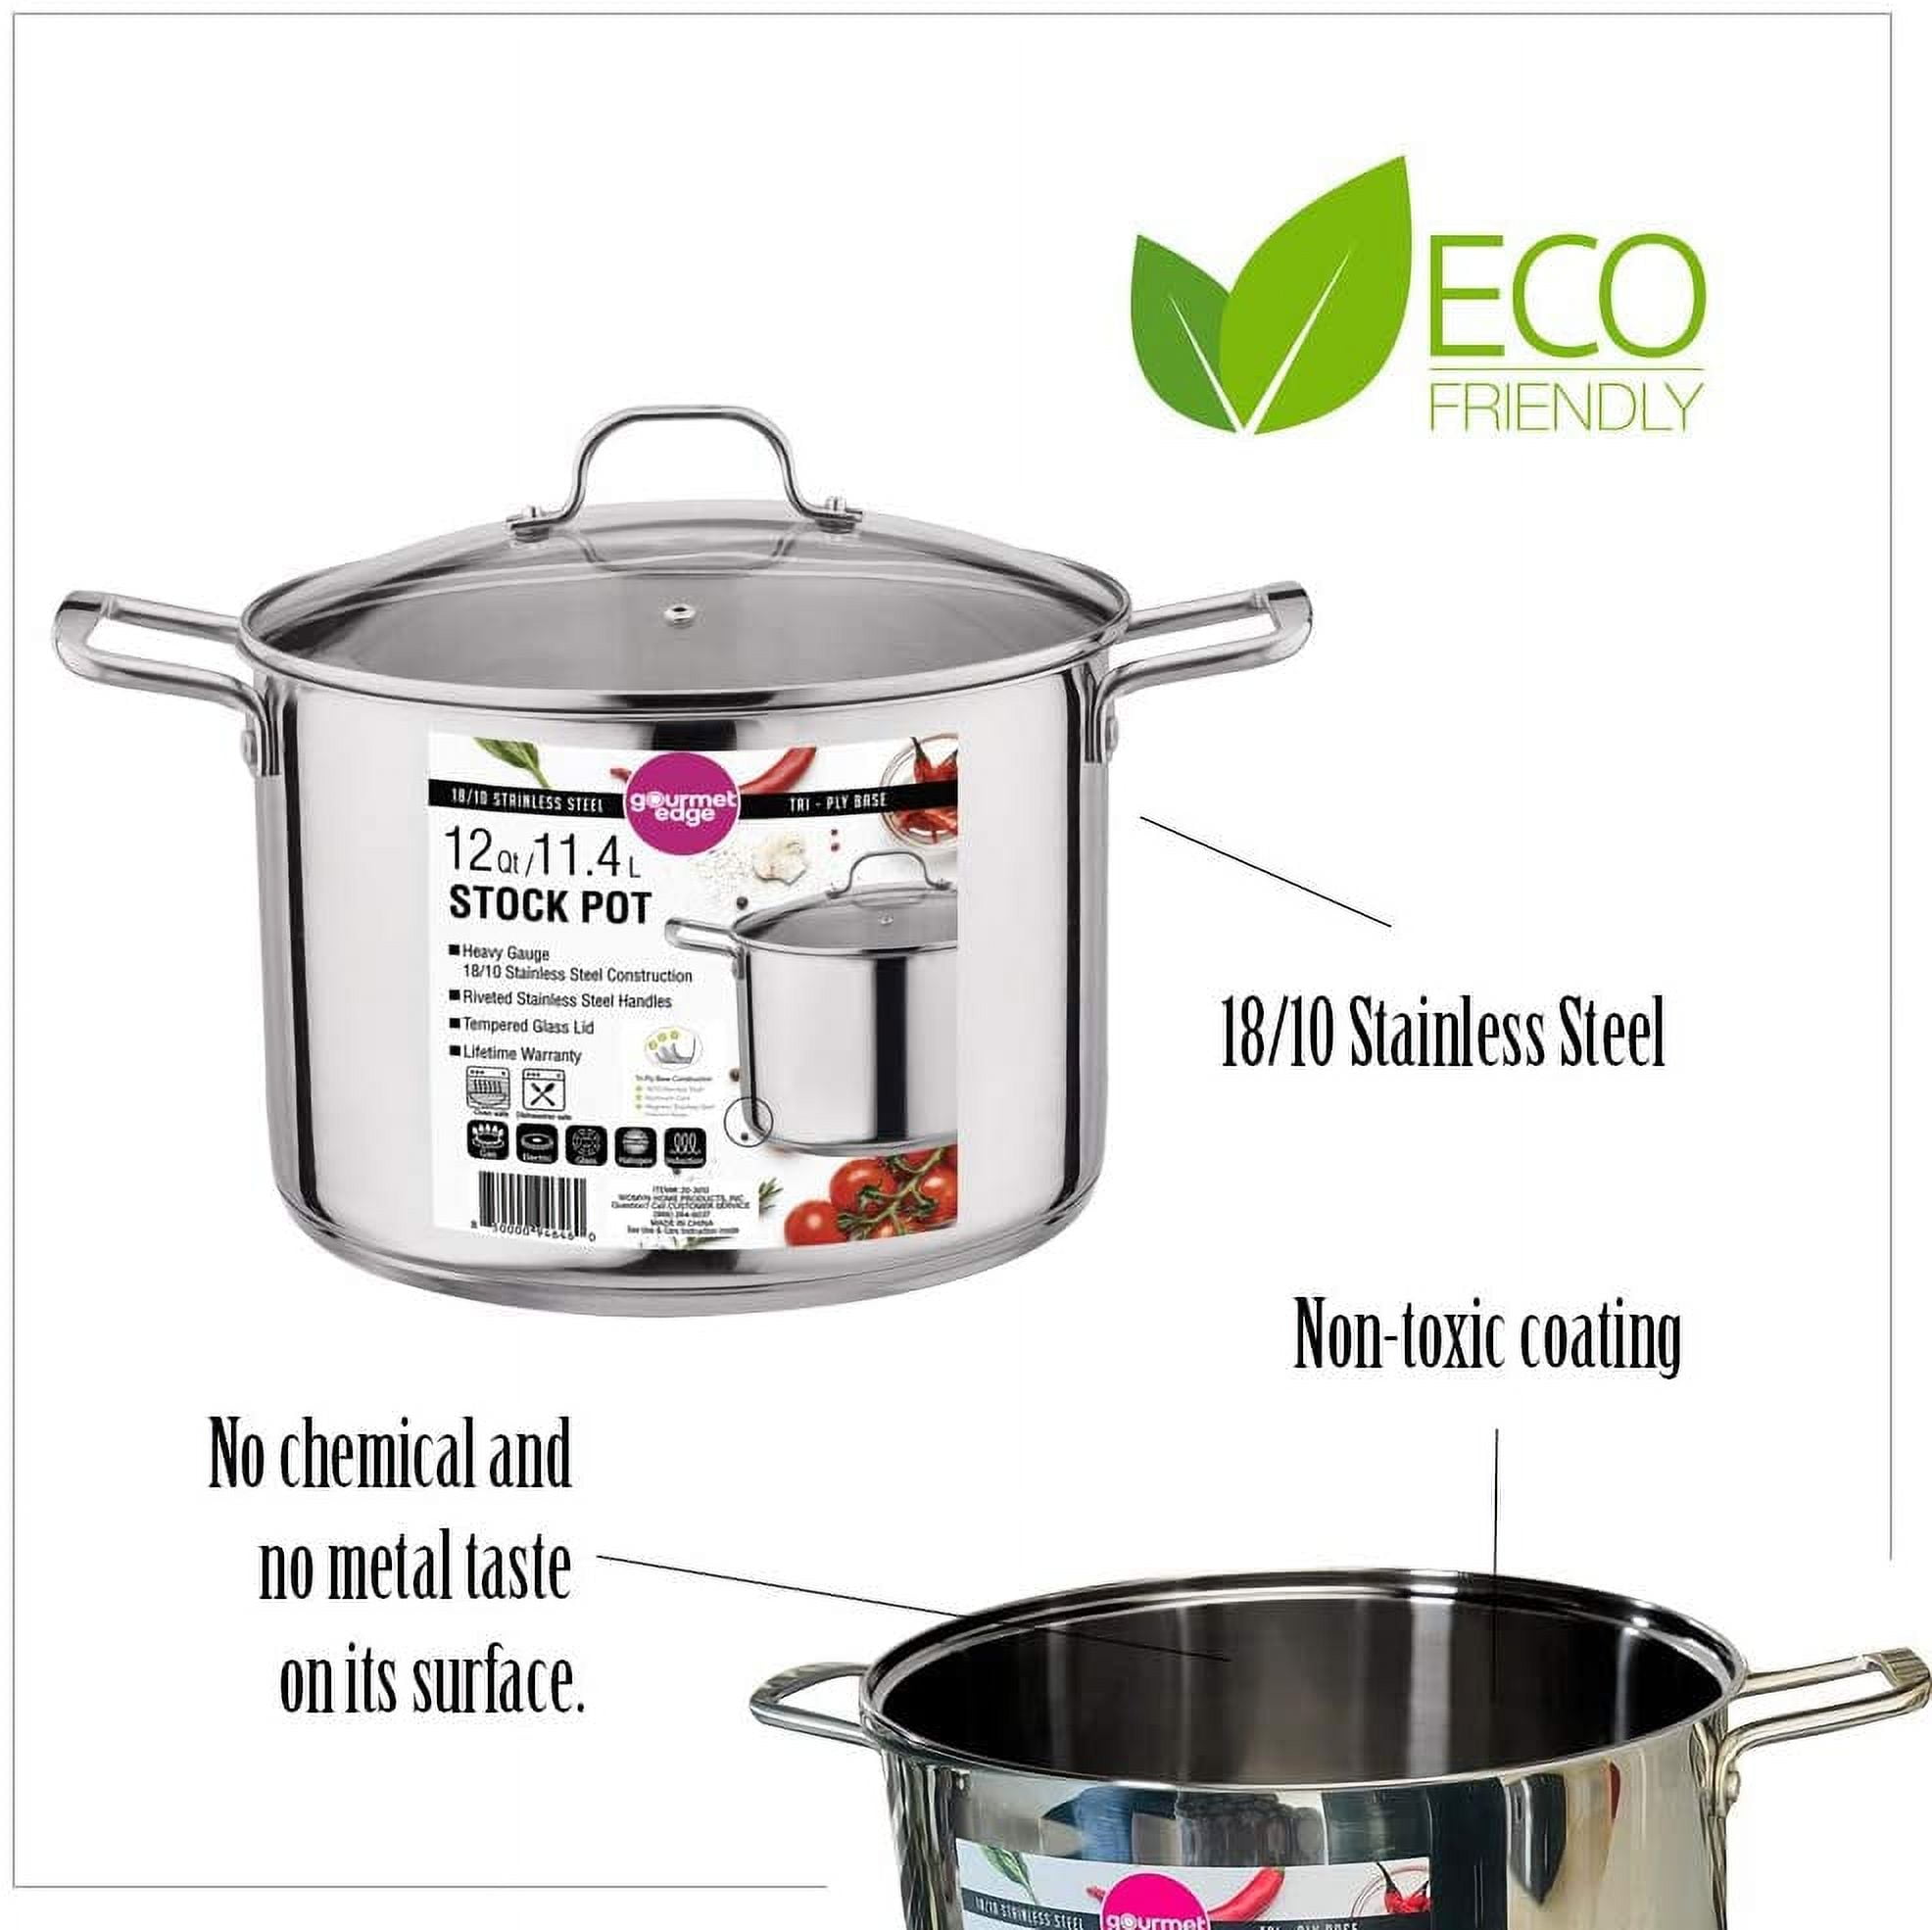 Up To 75% Off on Gourmet Edge 18/10 Stainless